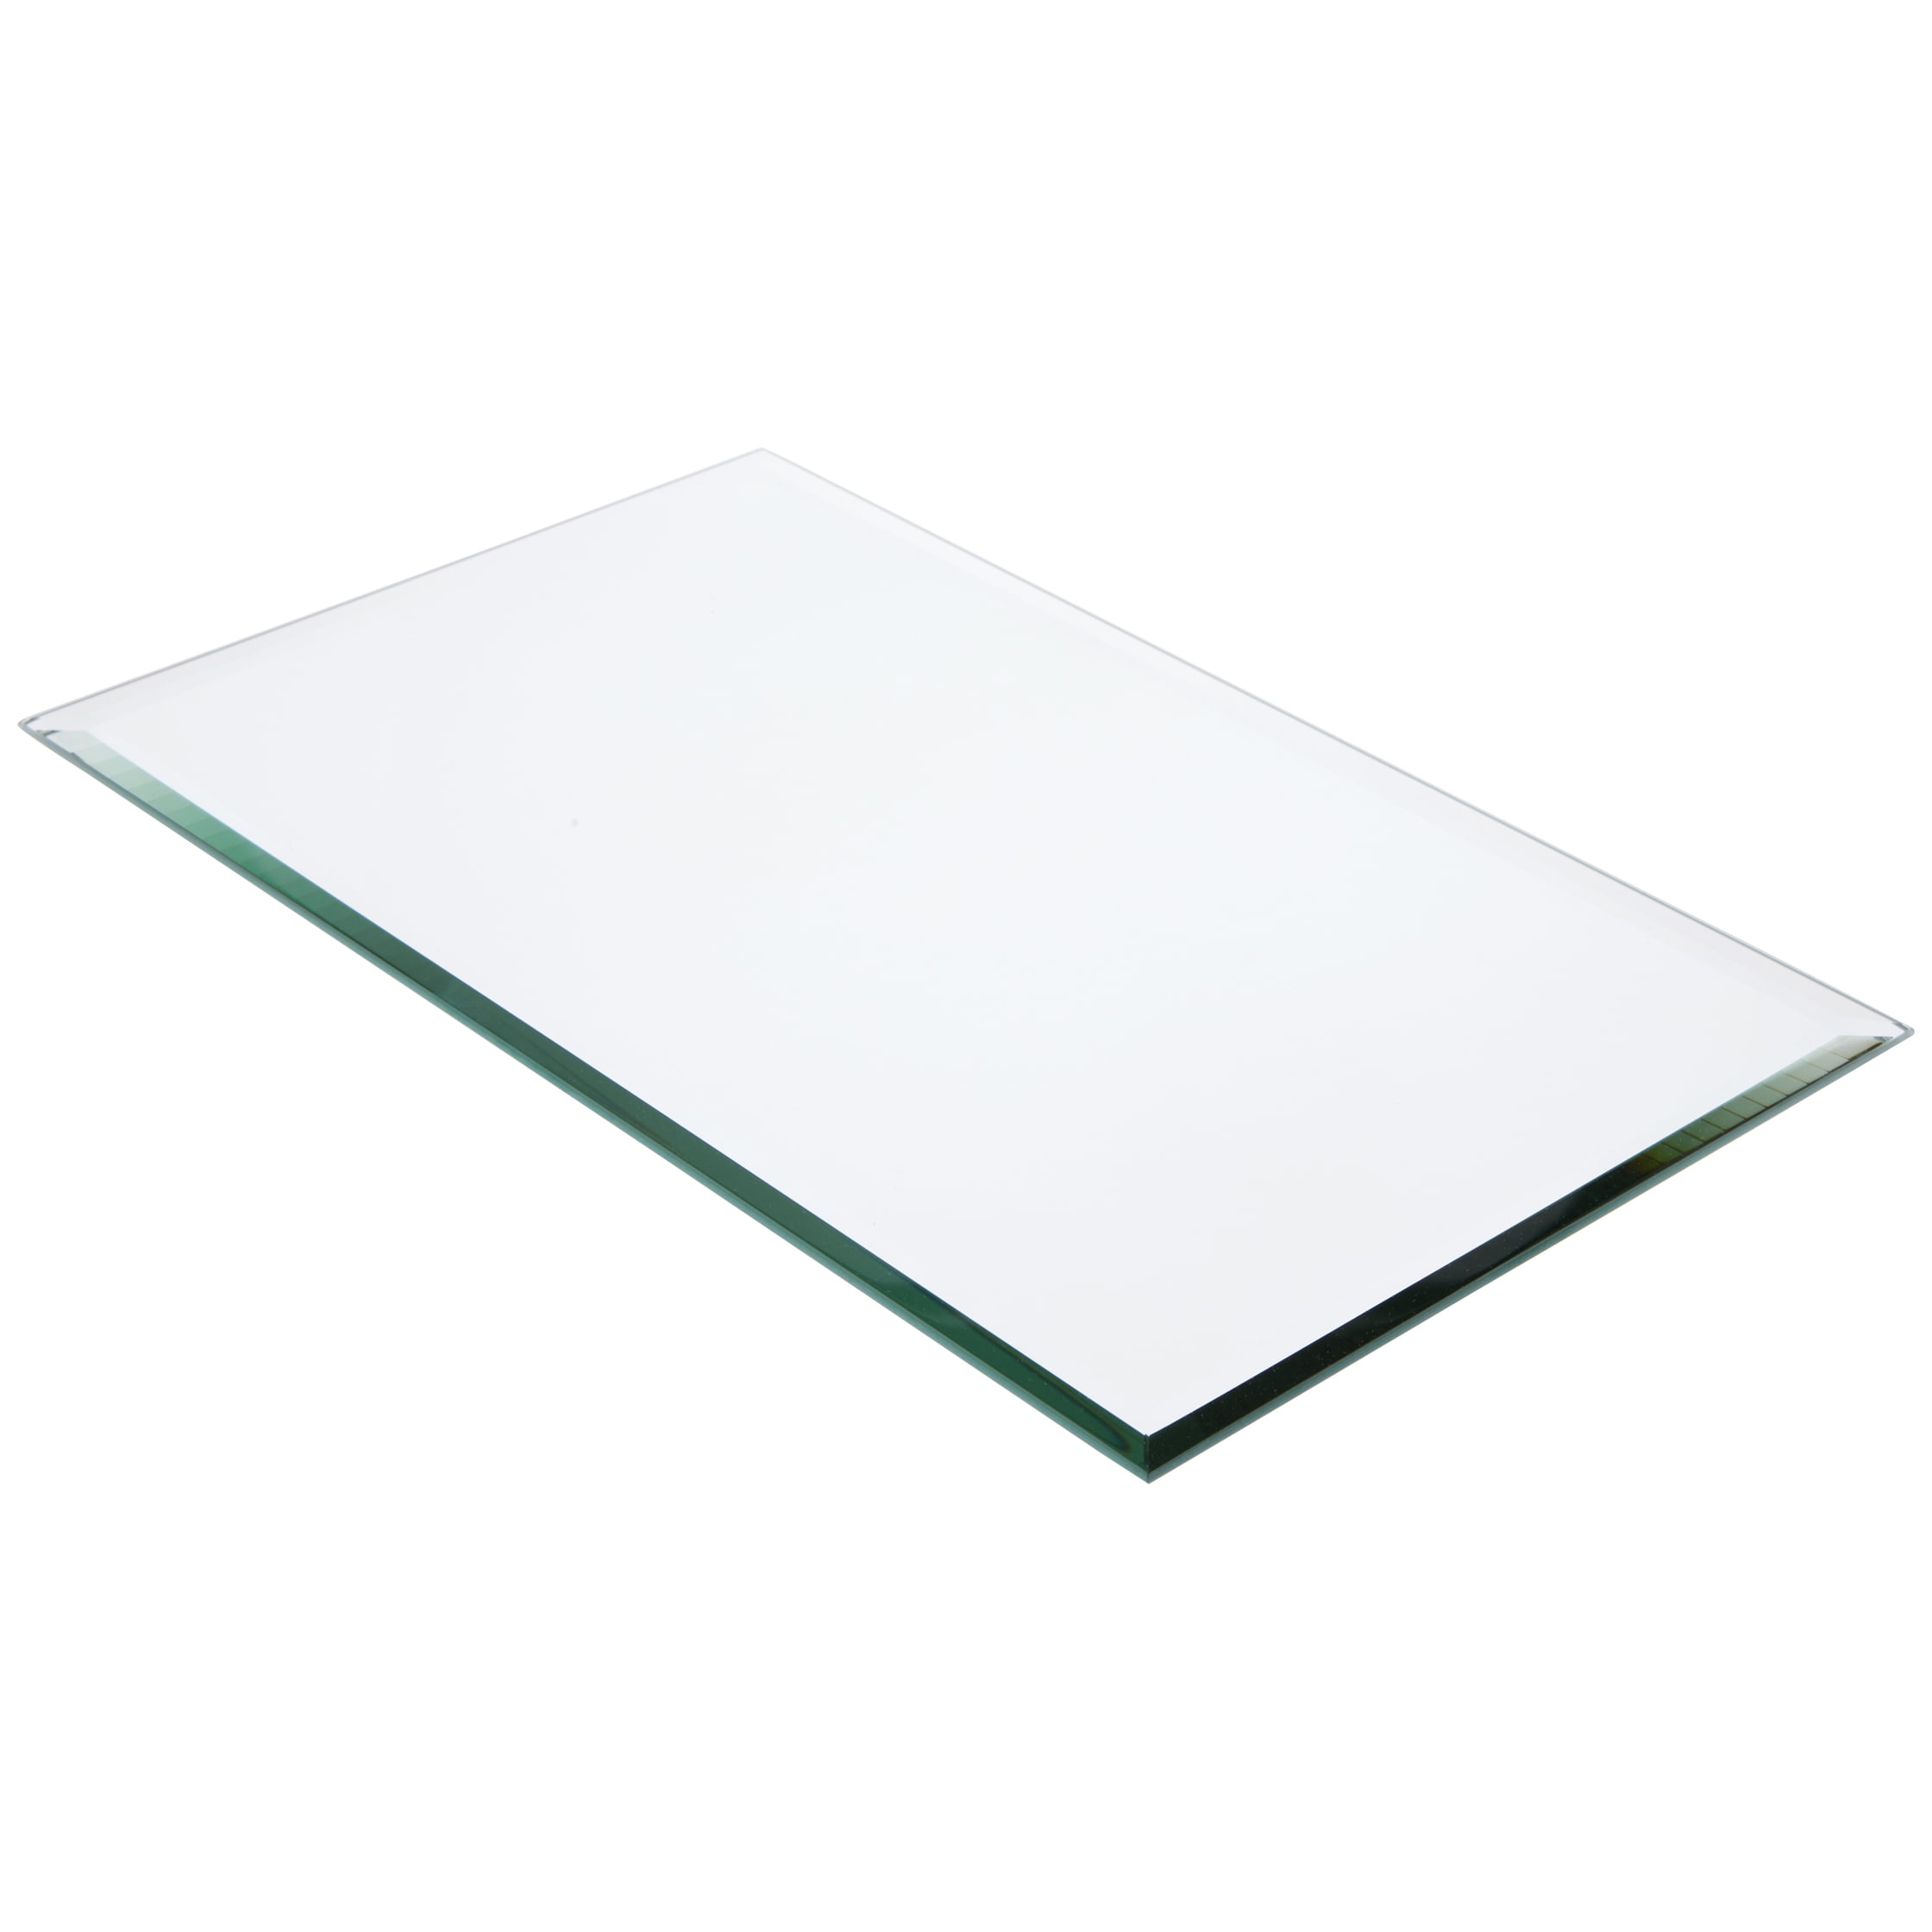 Plymor Square 3mm Beveled Glass Mirror 6 inch x 6 inch Pack of 24 